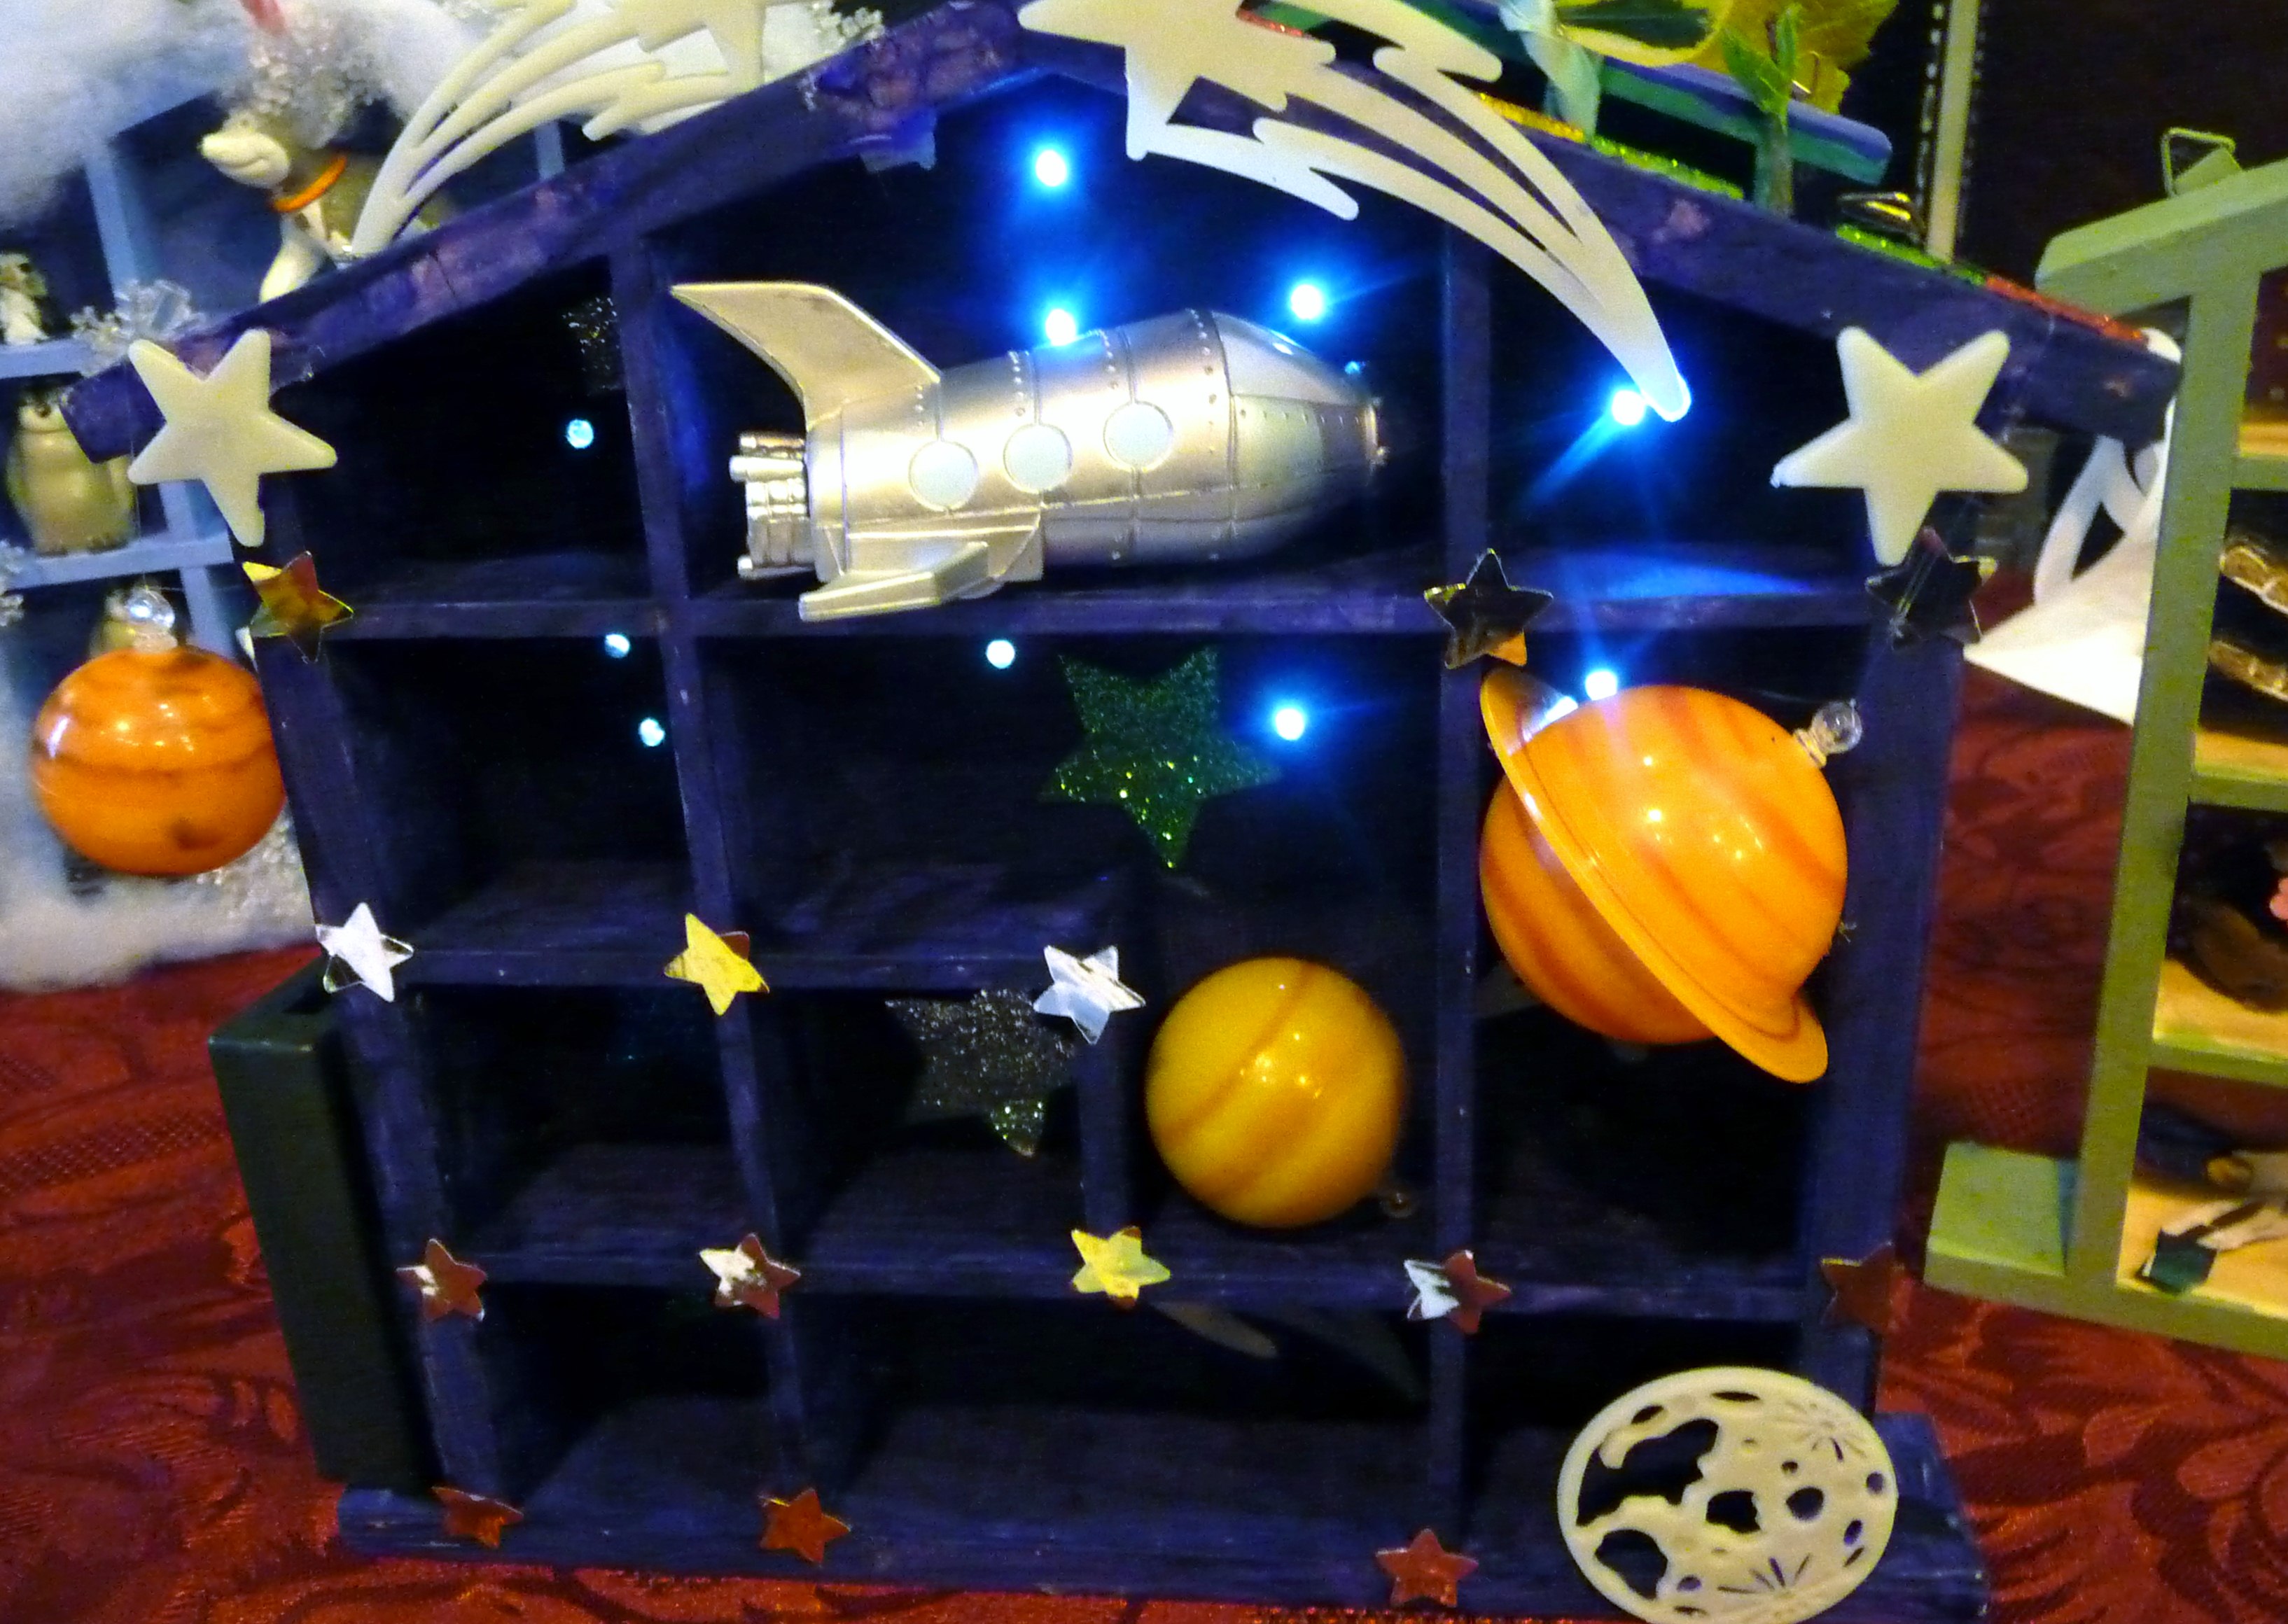 entry to "Decorate Your Home From Home" YE competition at MEG Christmas Party 2014